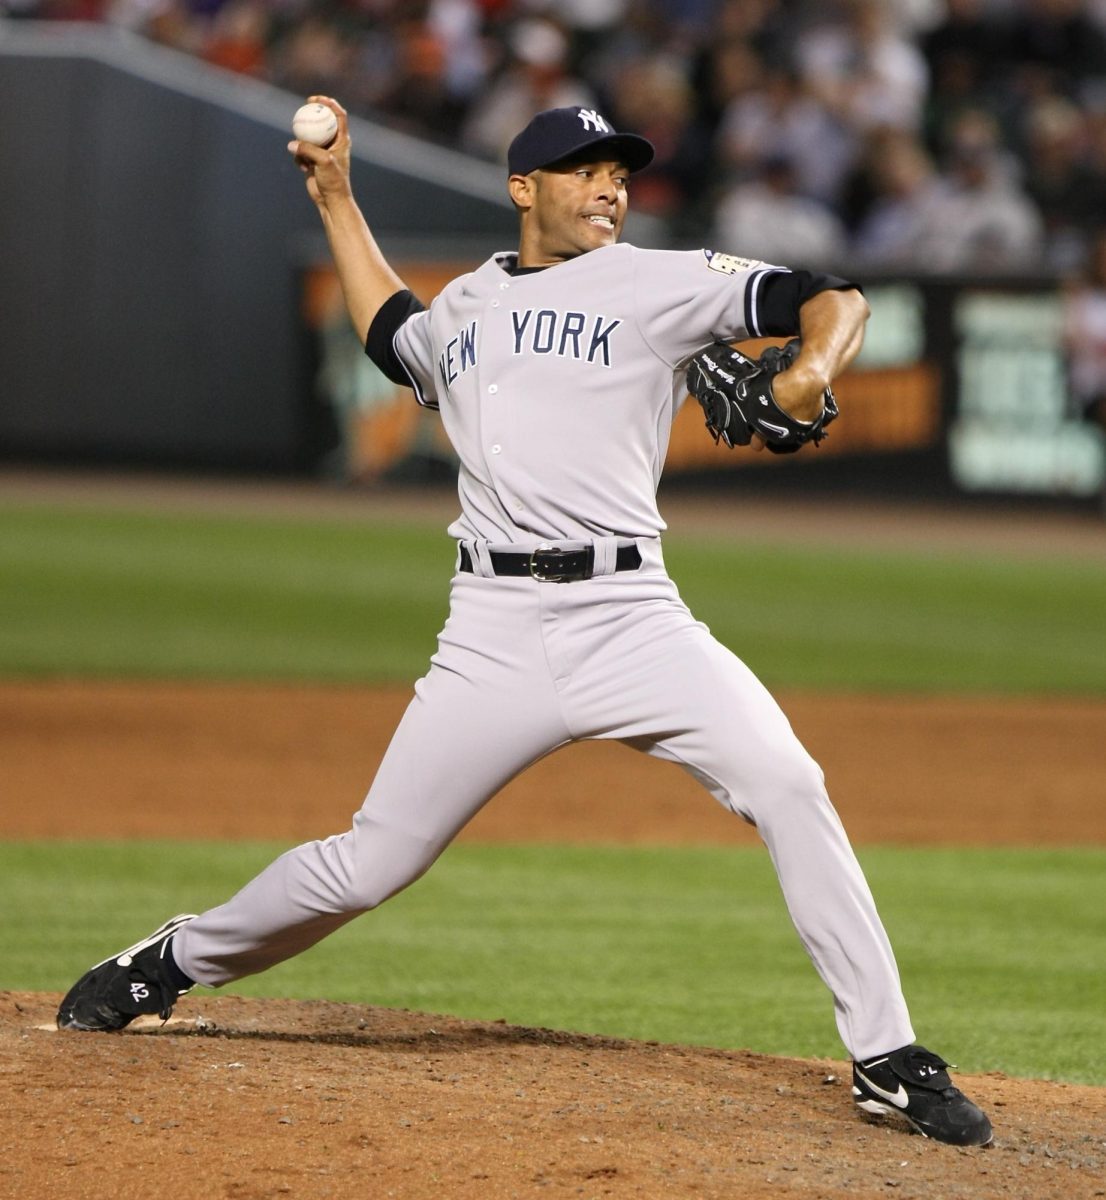 Wikimedia Commons | Since New York Yankees legend Mariano Rivera retired, the team emphasis on having a dominant closer has diminished. Eilat Herman (CAS 26) calls on that to change.